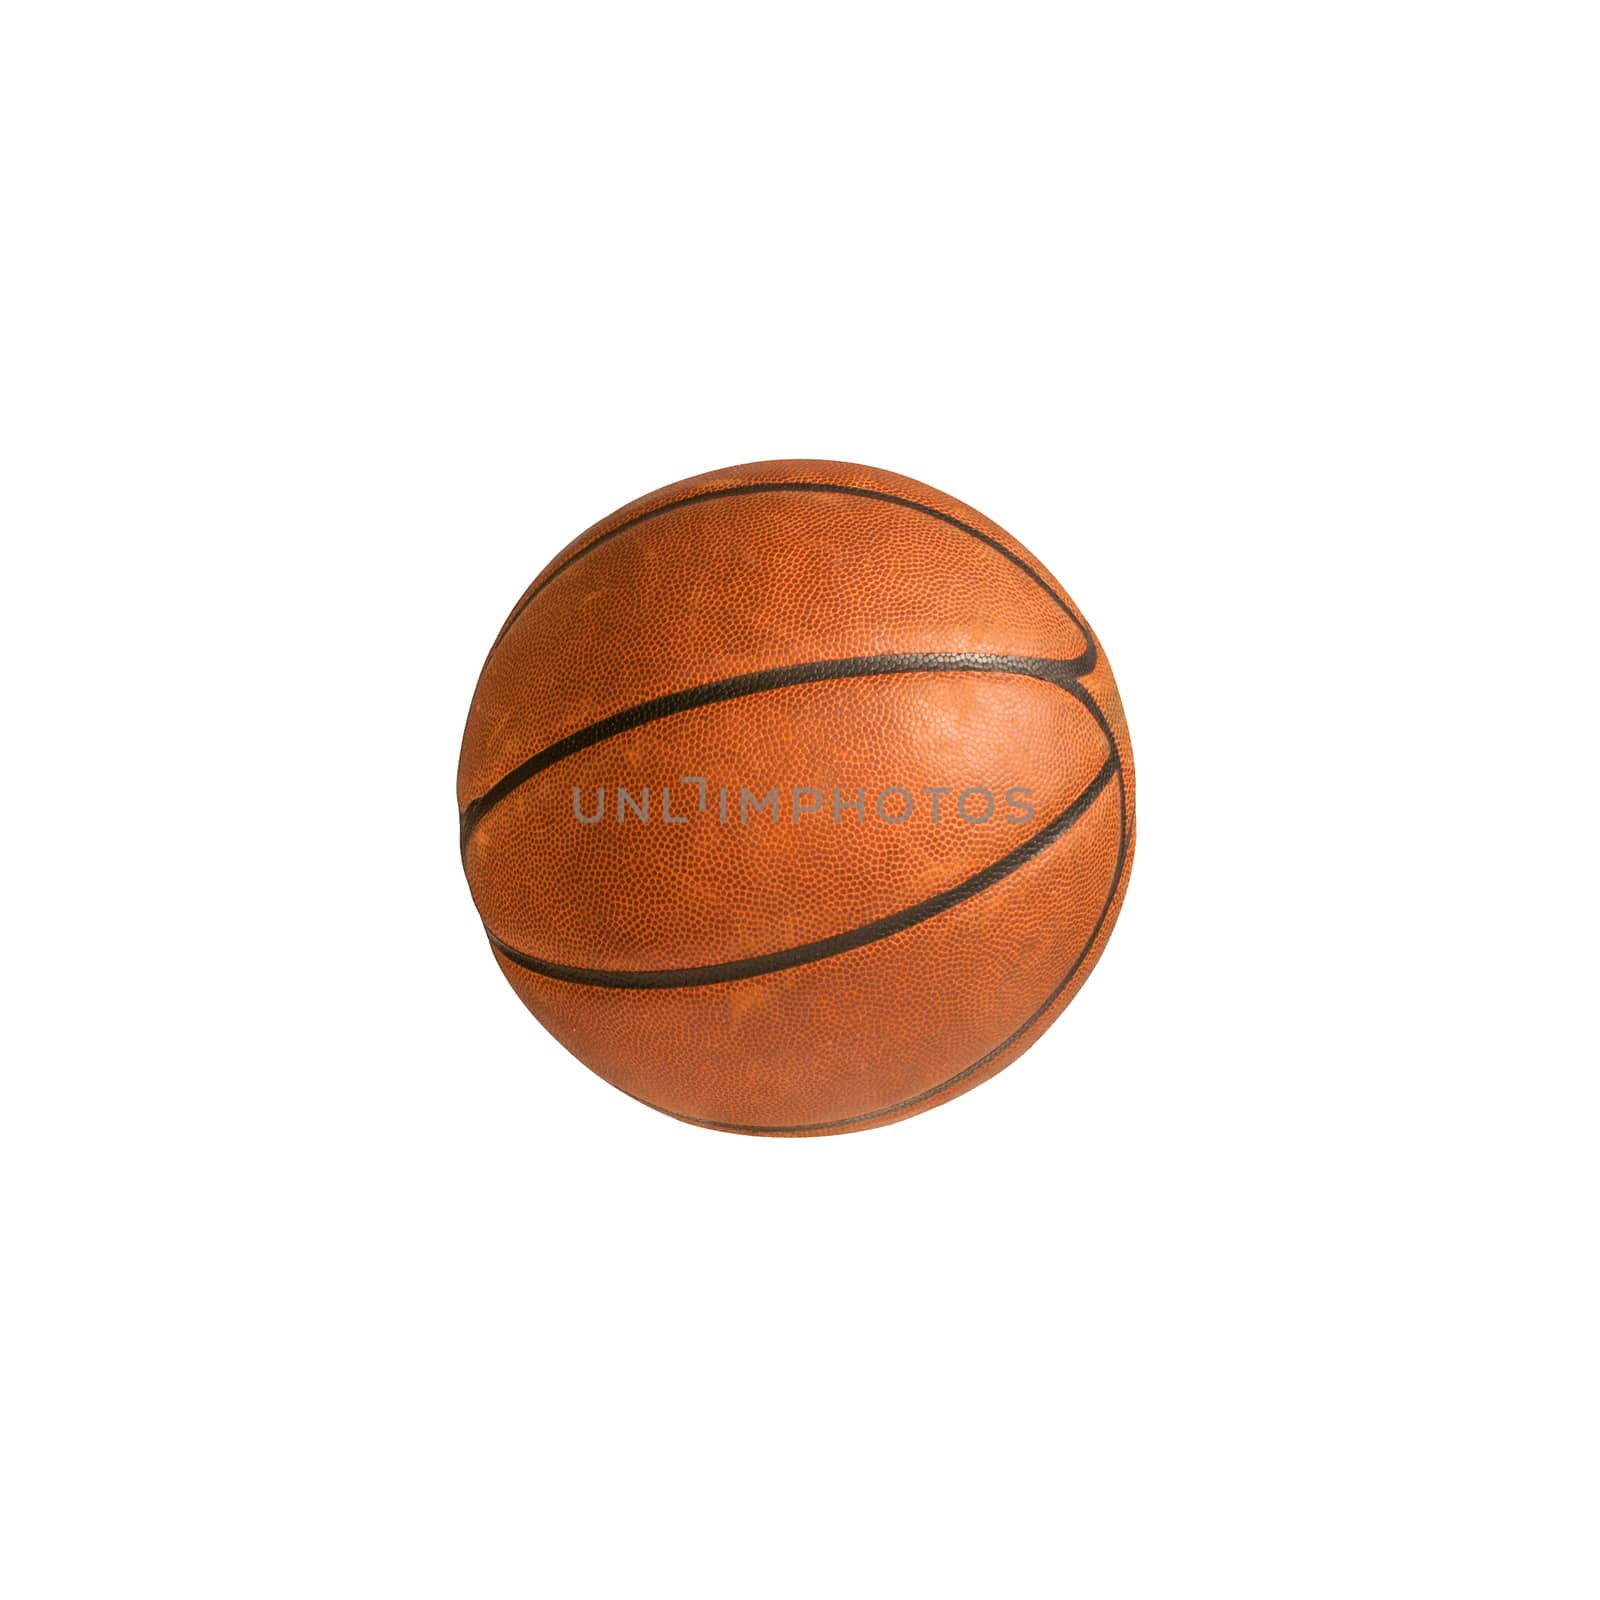 Basketball on White Background by rcarner